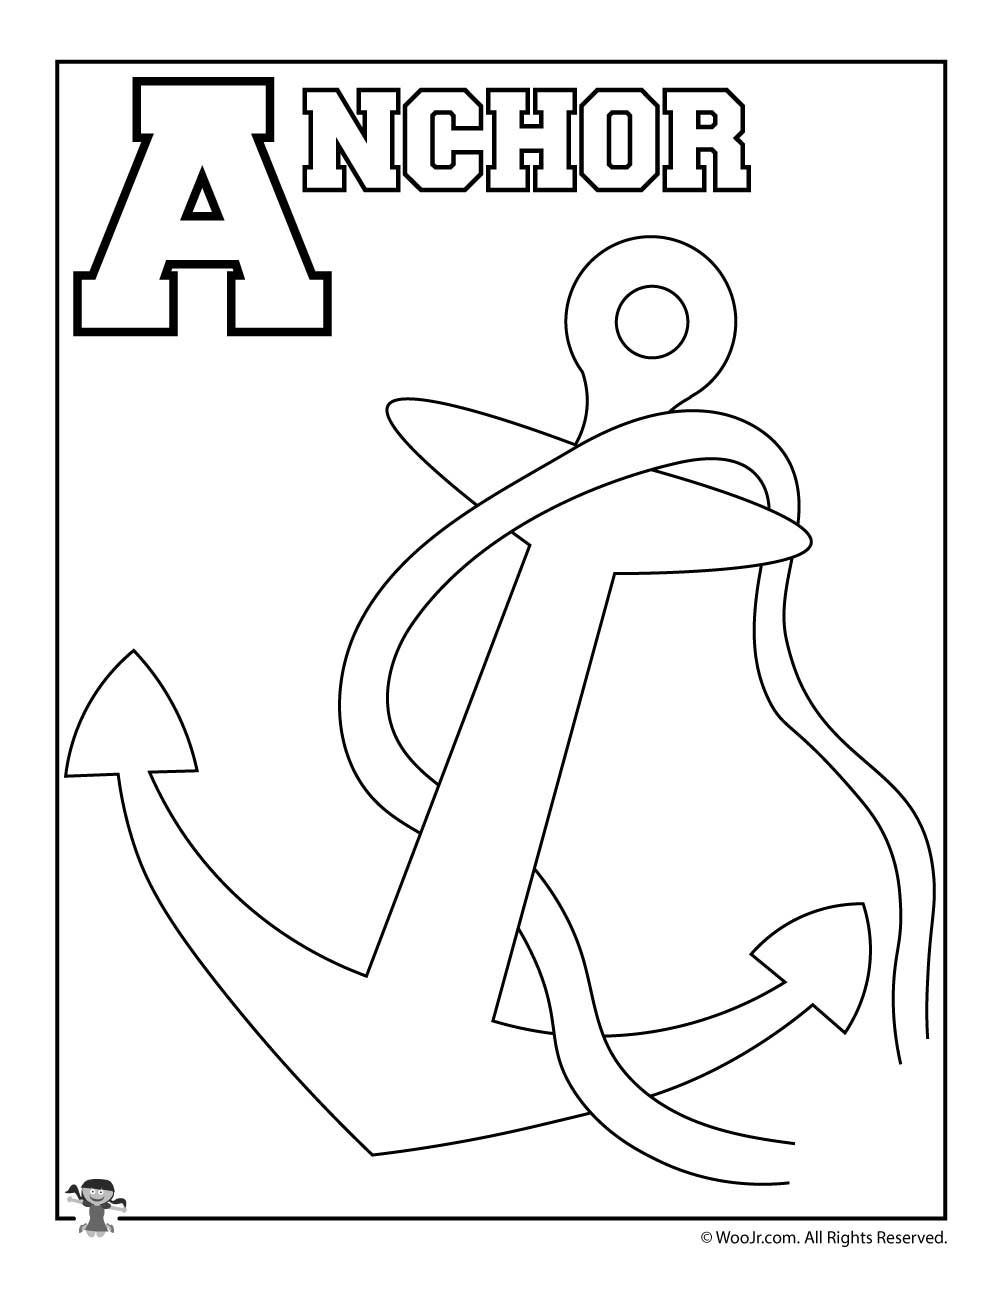 A is for Anchor Coloring Page | Woo! Jr. Kids Activities